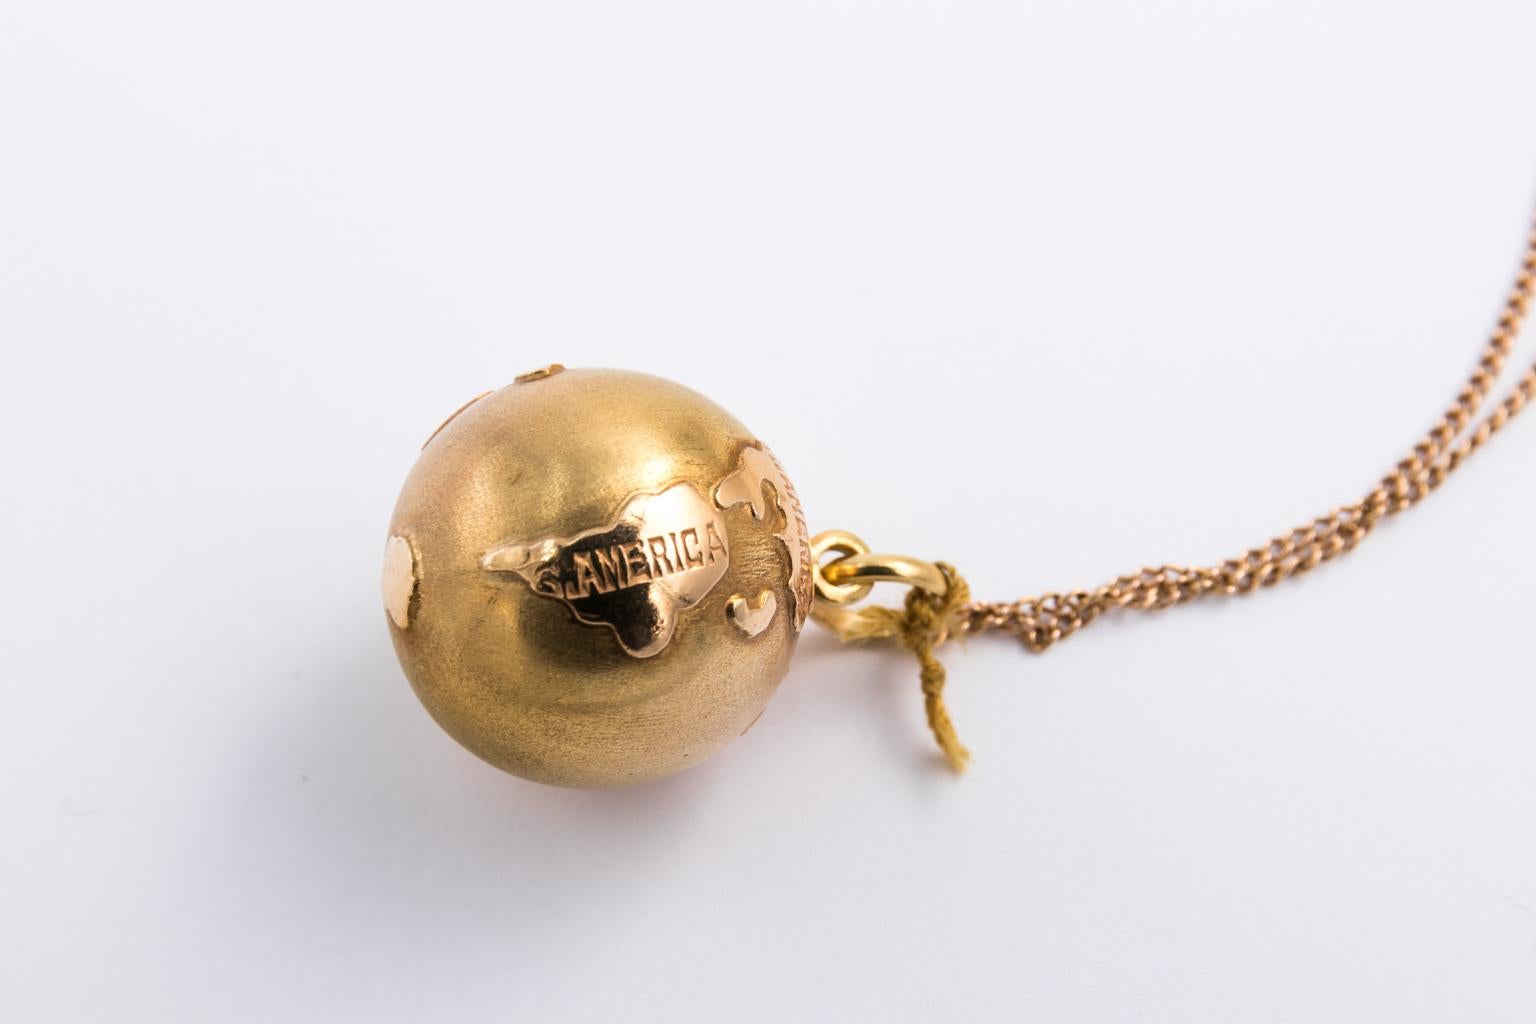 Circa mid-20th century gold charm necklace consisting of an 18 karat gold globe paired with an Italian black horn amulet. Charms are strung on an 18 karat gold chain. The globe charm also features labels of each country.
